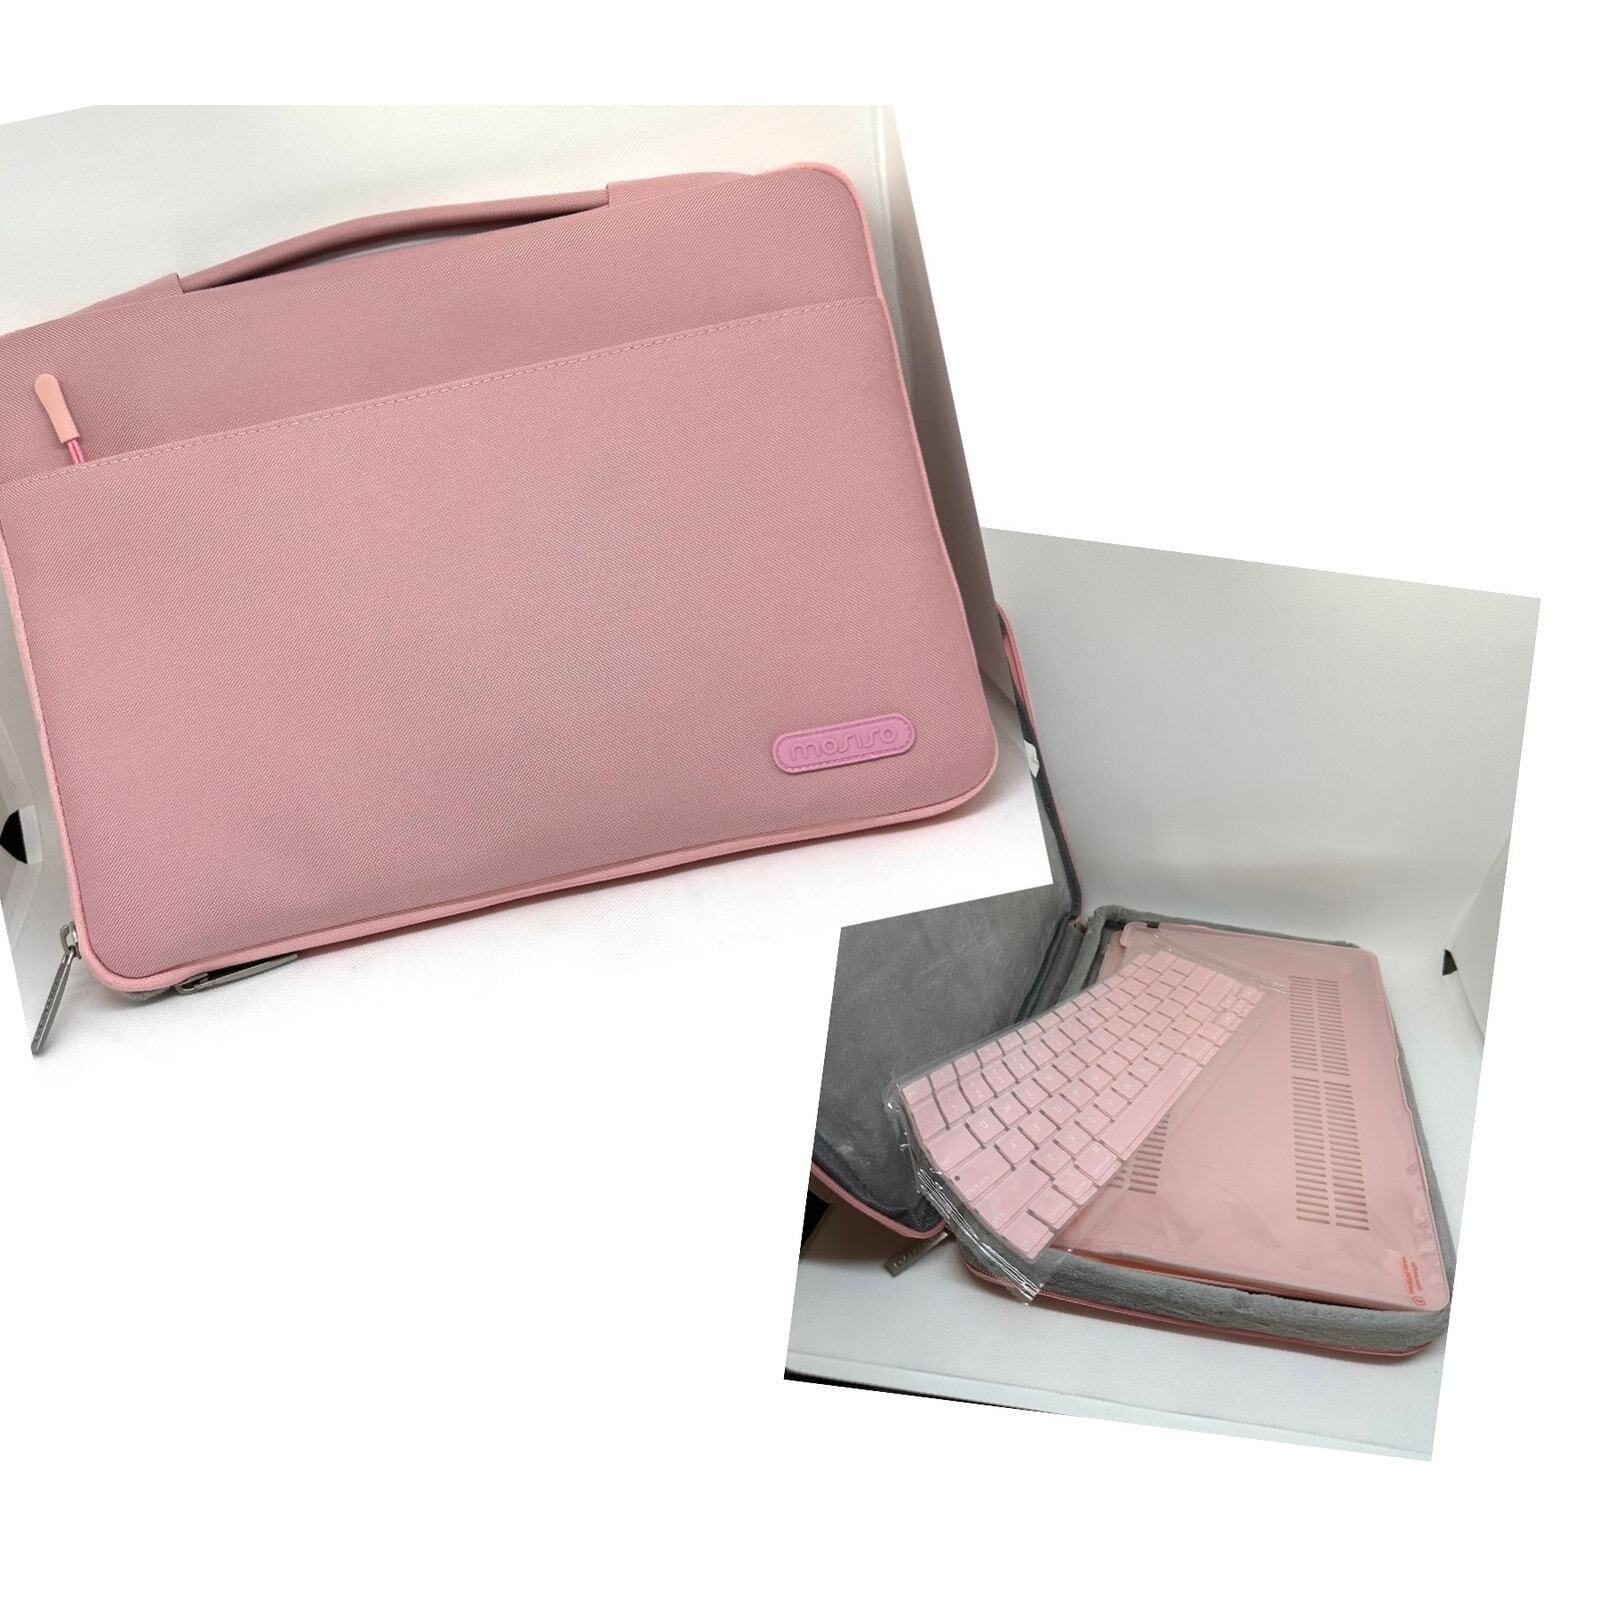 MOSISO Pink Mac Airbook Carrying Case-Hard Shell Cover-Keyboard Skin- NWOT